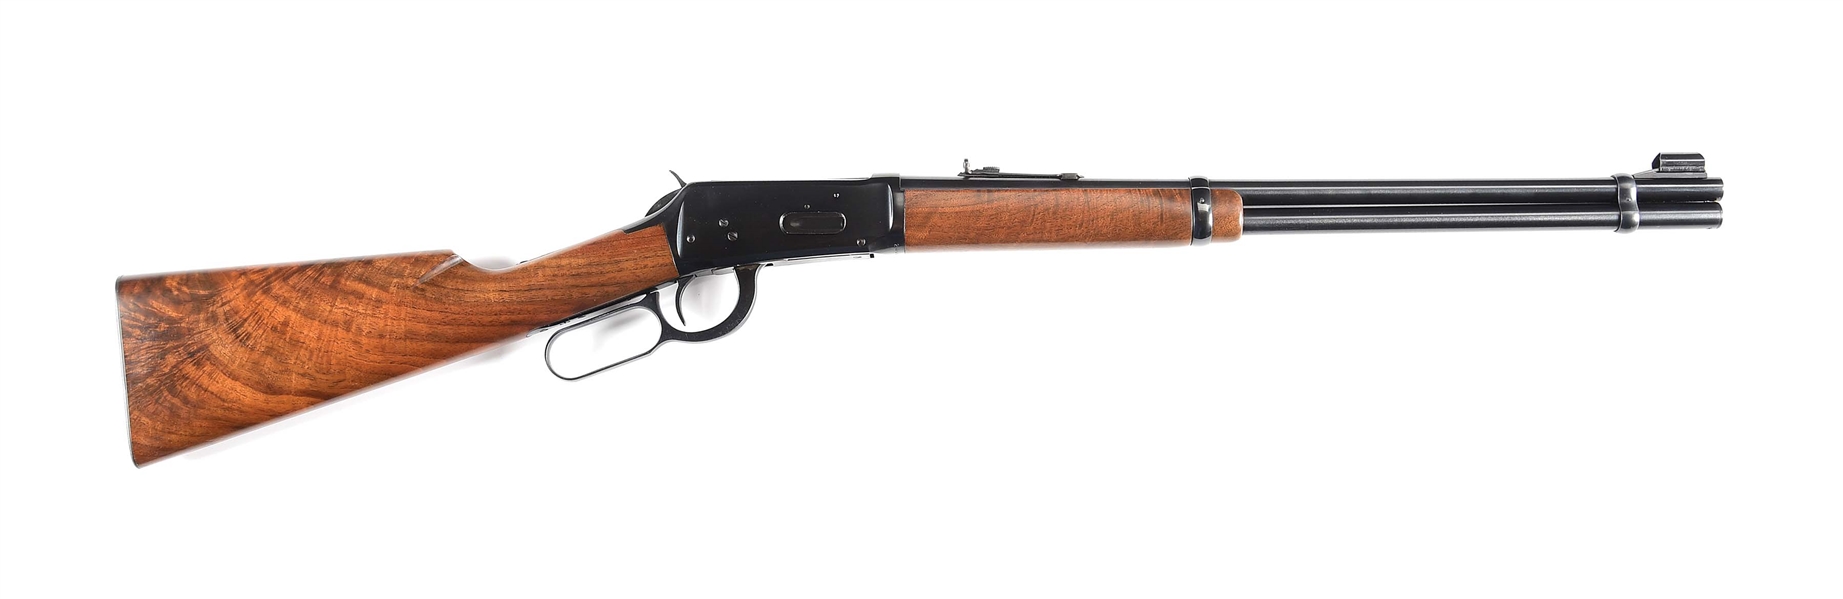 (C) THE LAST DOCUMENTED PRE-64 WINCHESTER MODEL 1894 LEVER ACTION RIFLE MANUFACTURED.